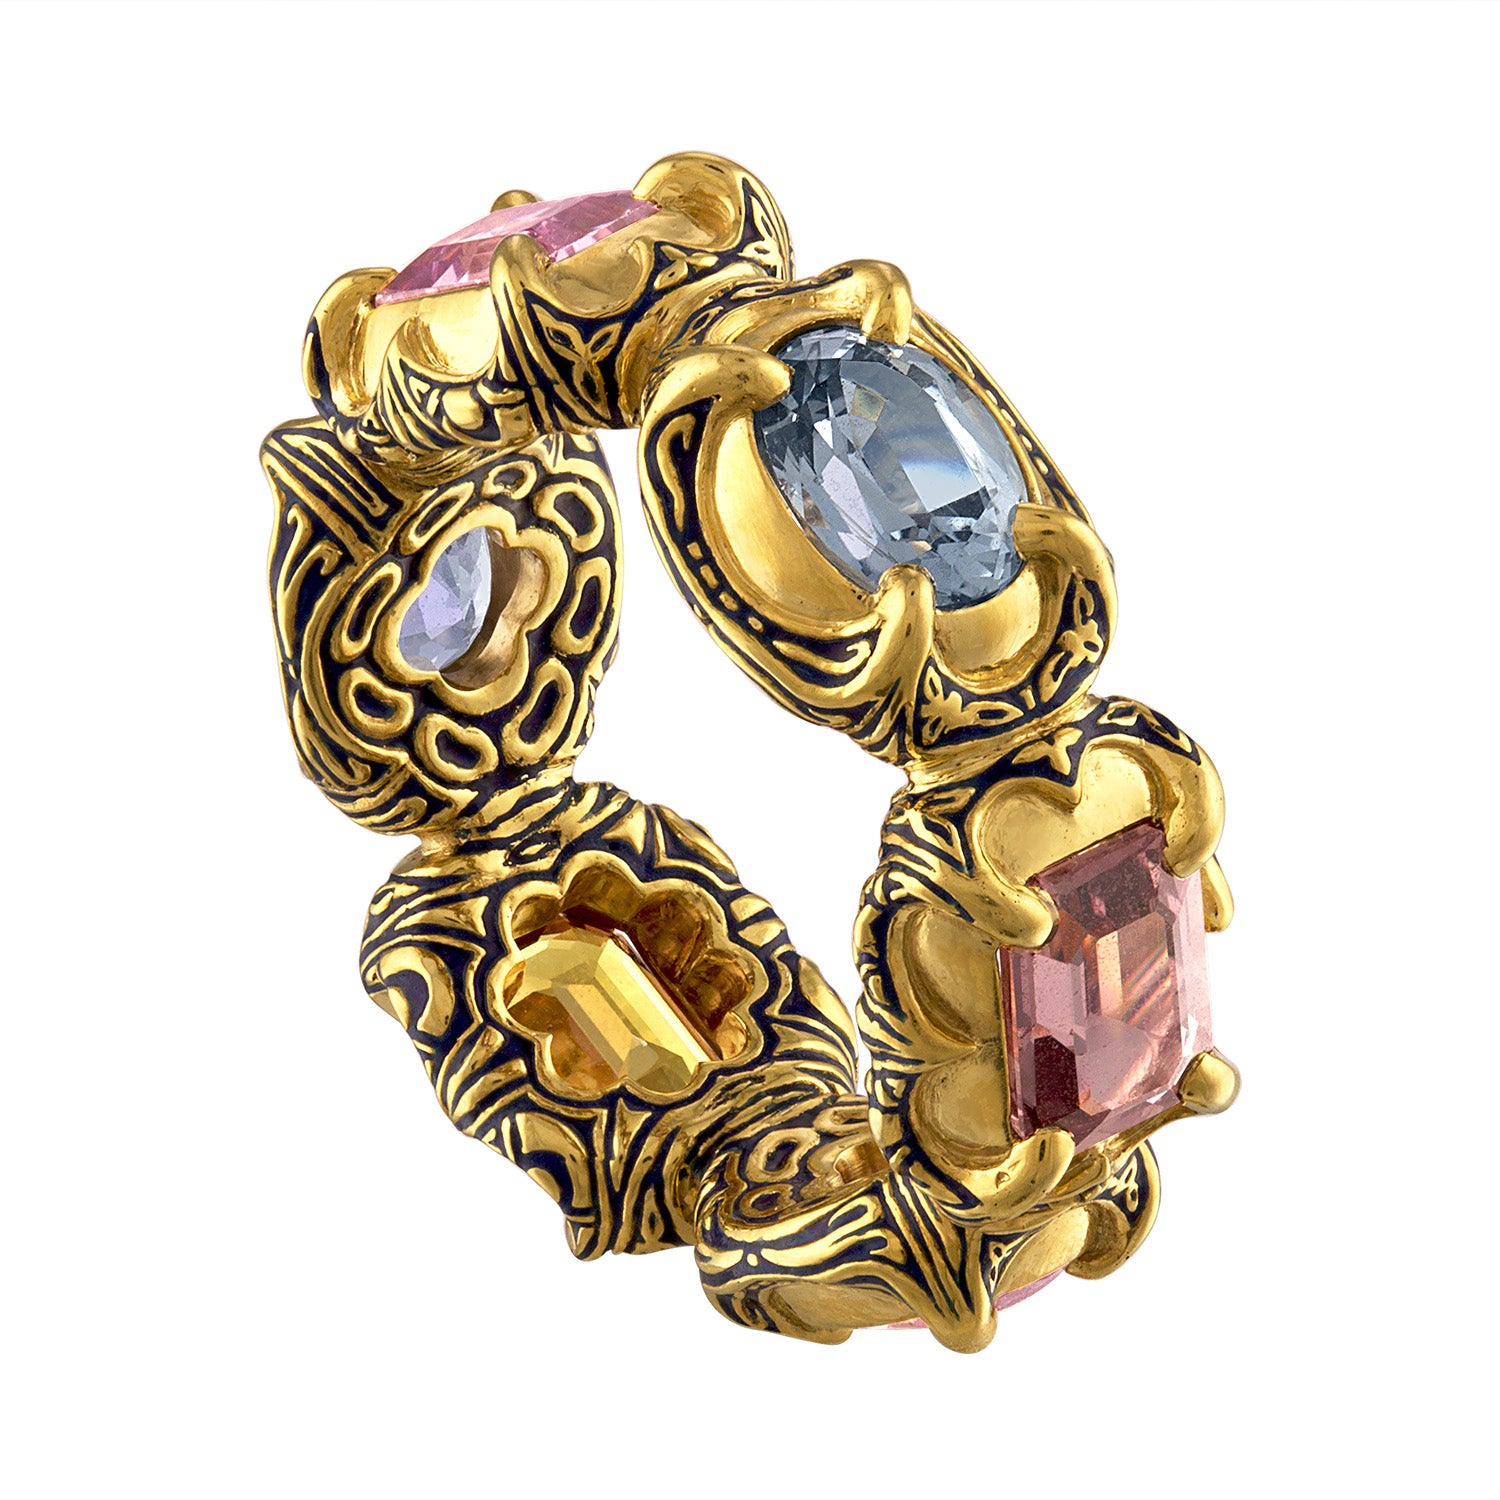 Otto Jakob six stone eternity band in 18 karat yellow gold with navy blue enamel. A fun and unique addition to any jewelry collection, perfect for clients seeking distinctive style.